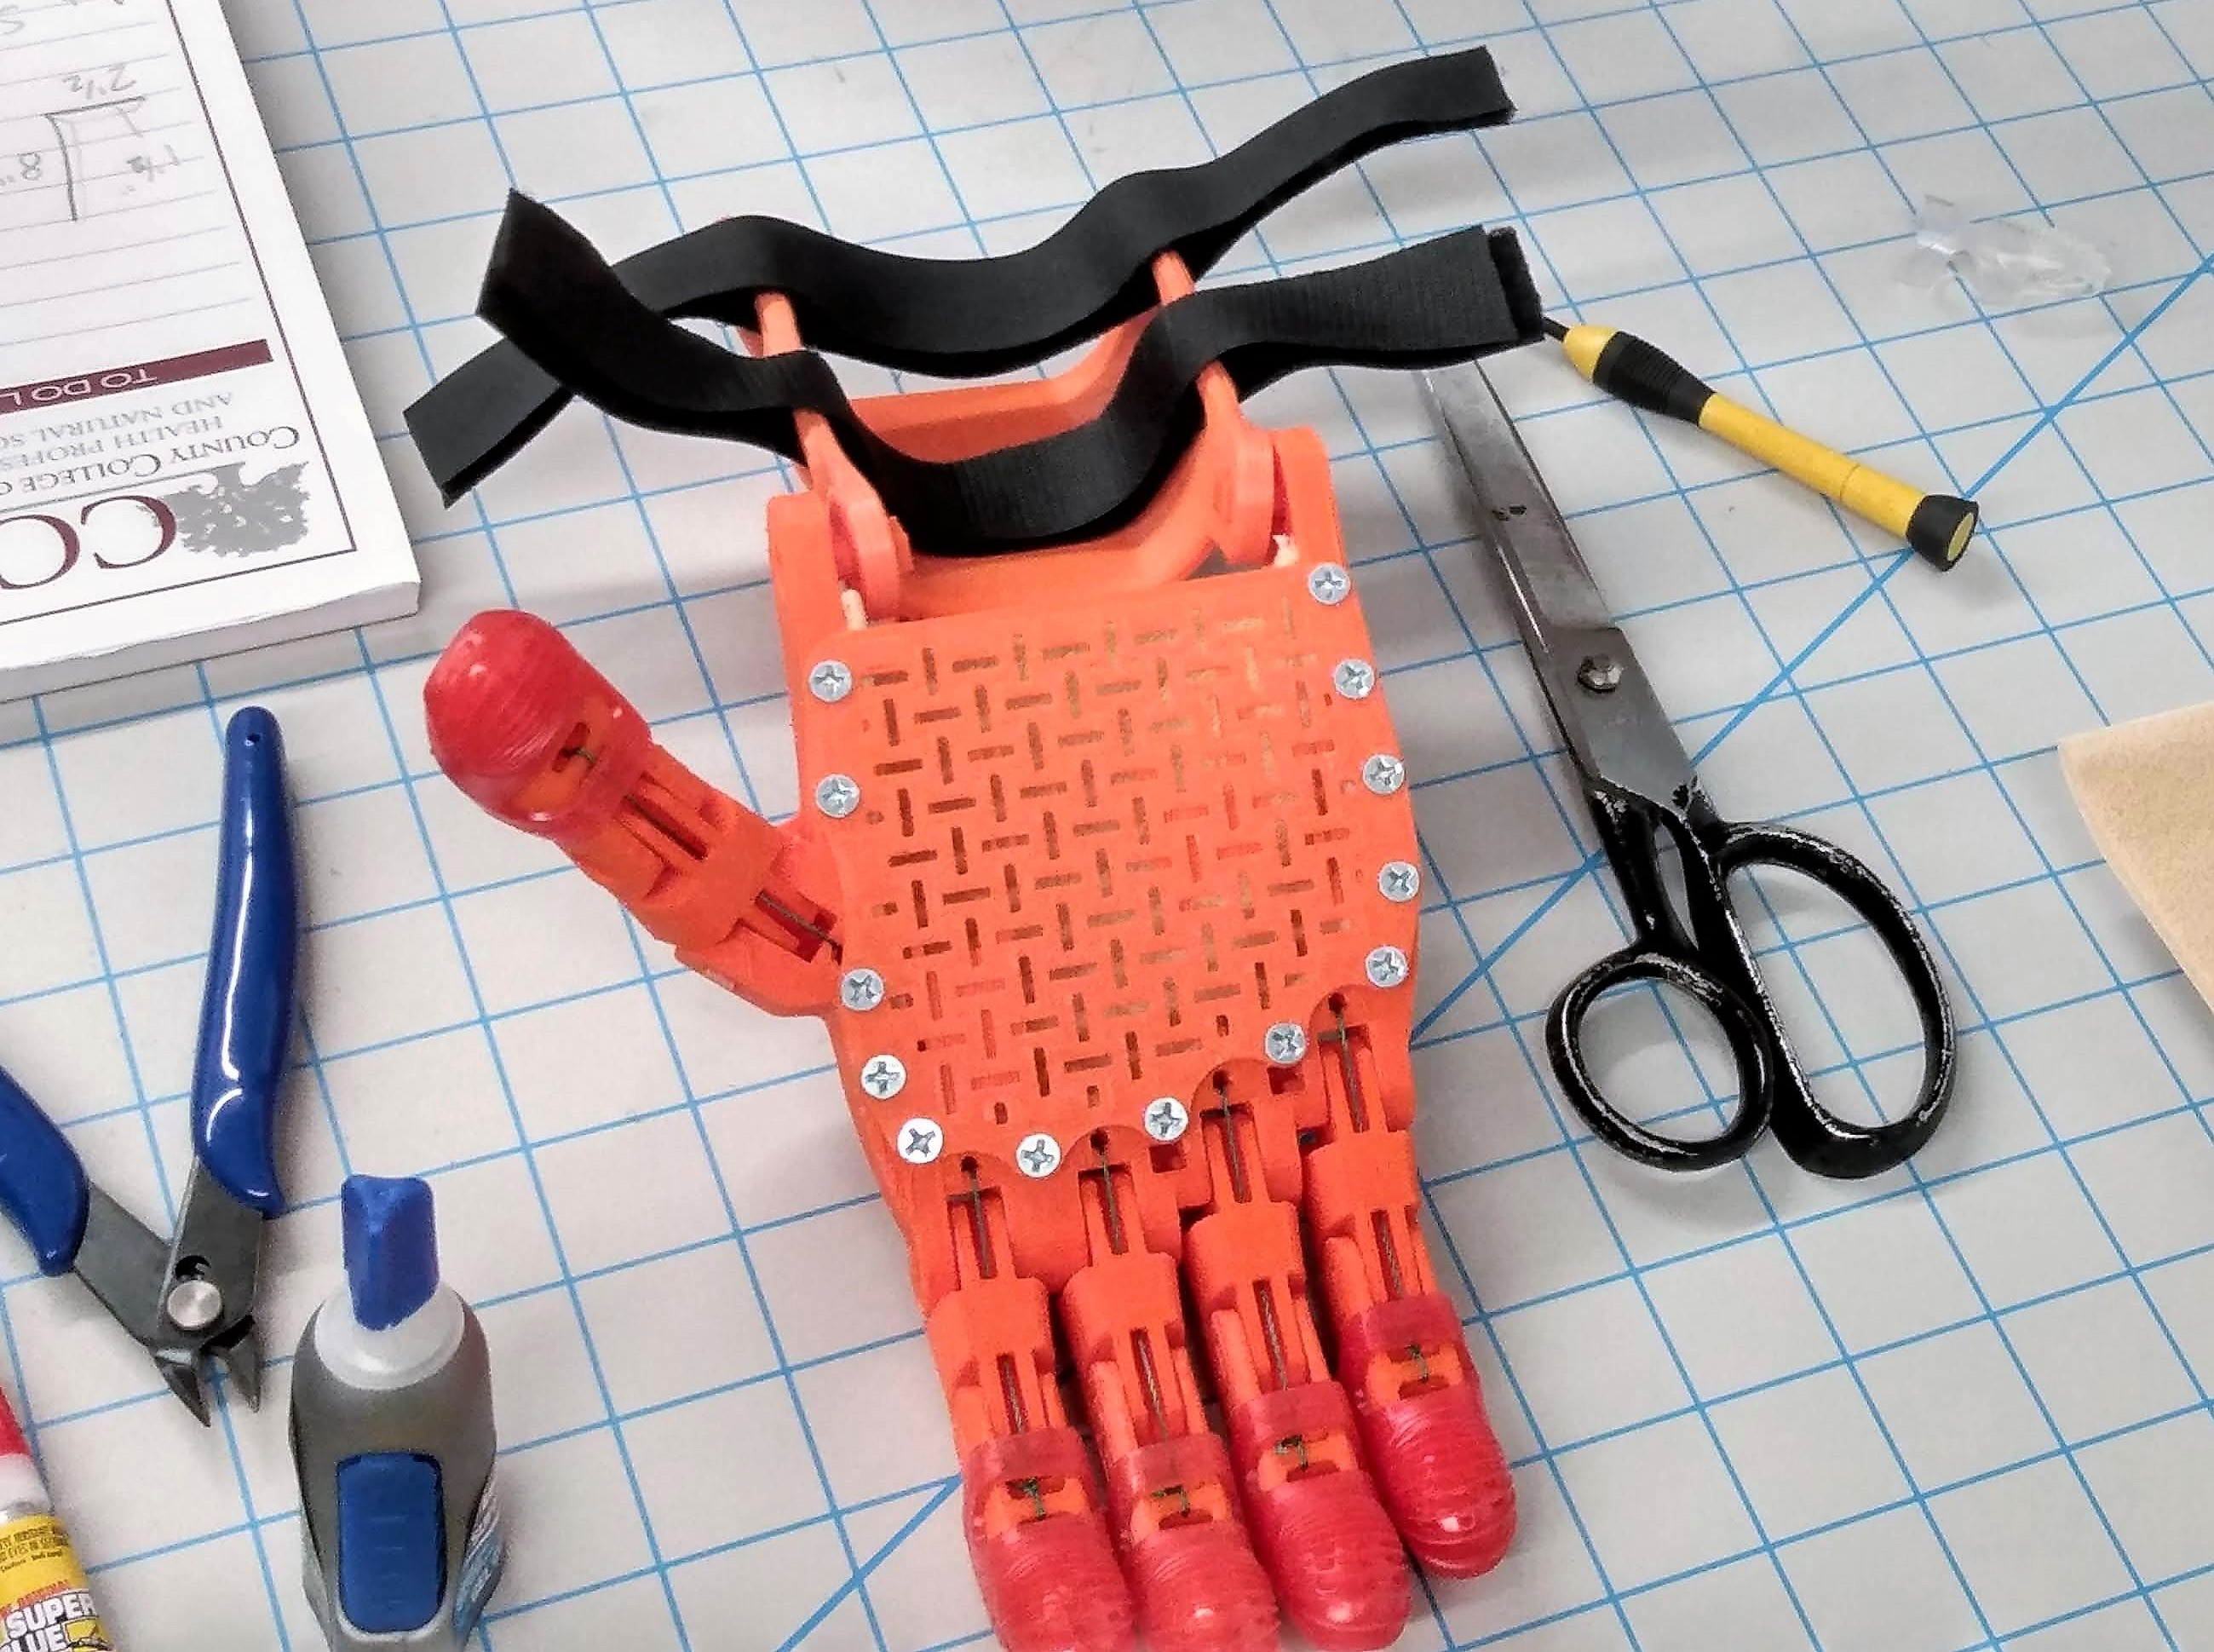 Prosthetic hand with assembly tools